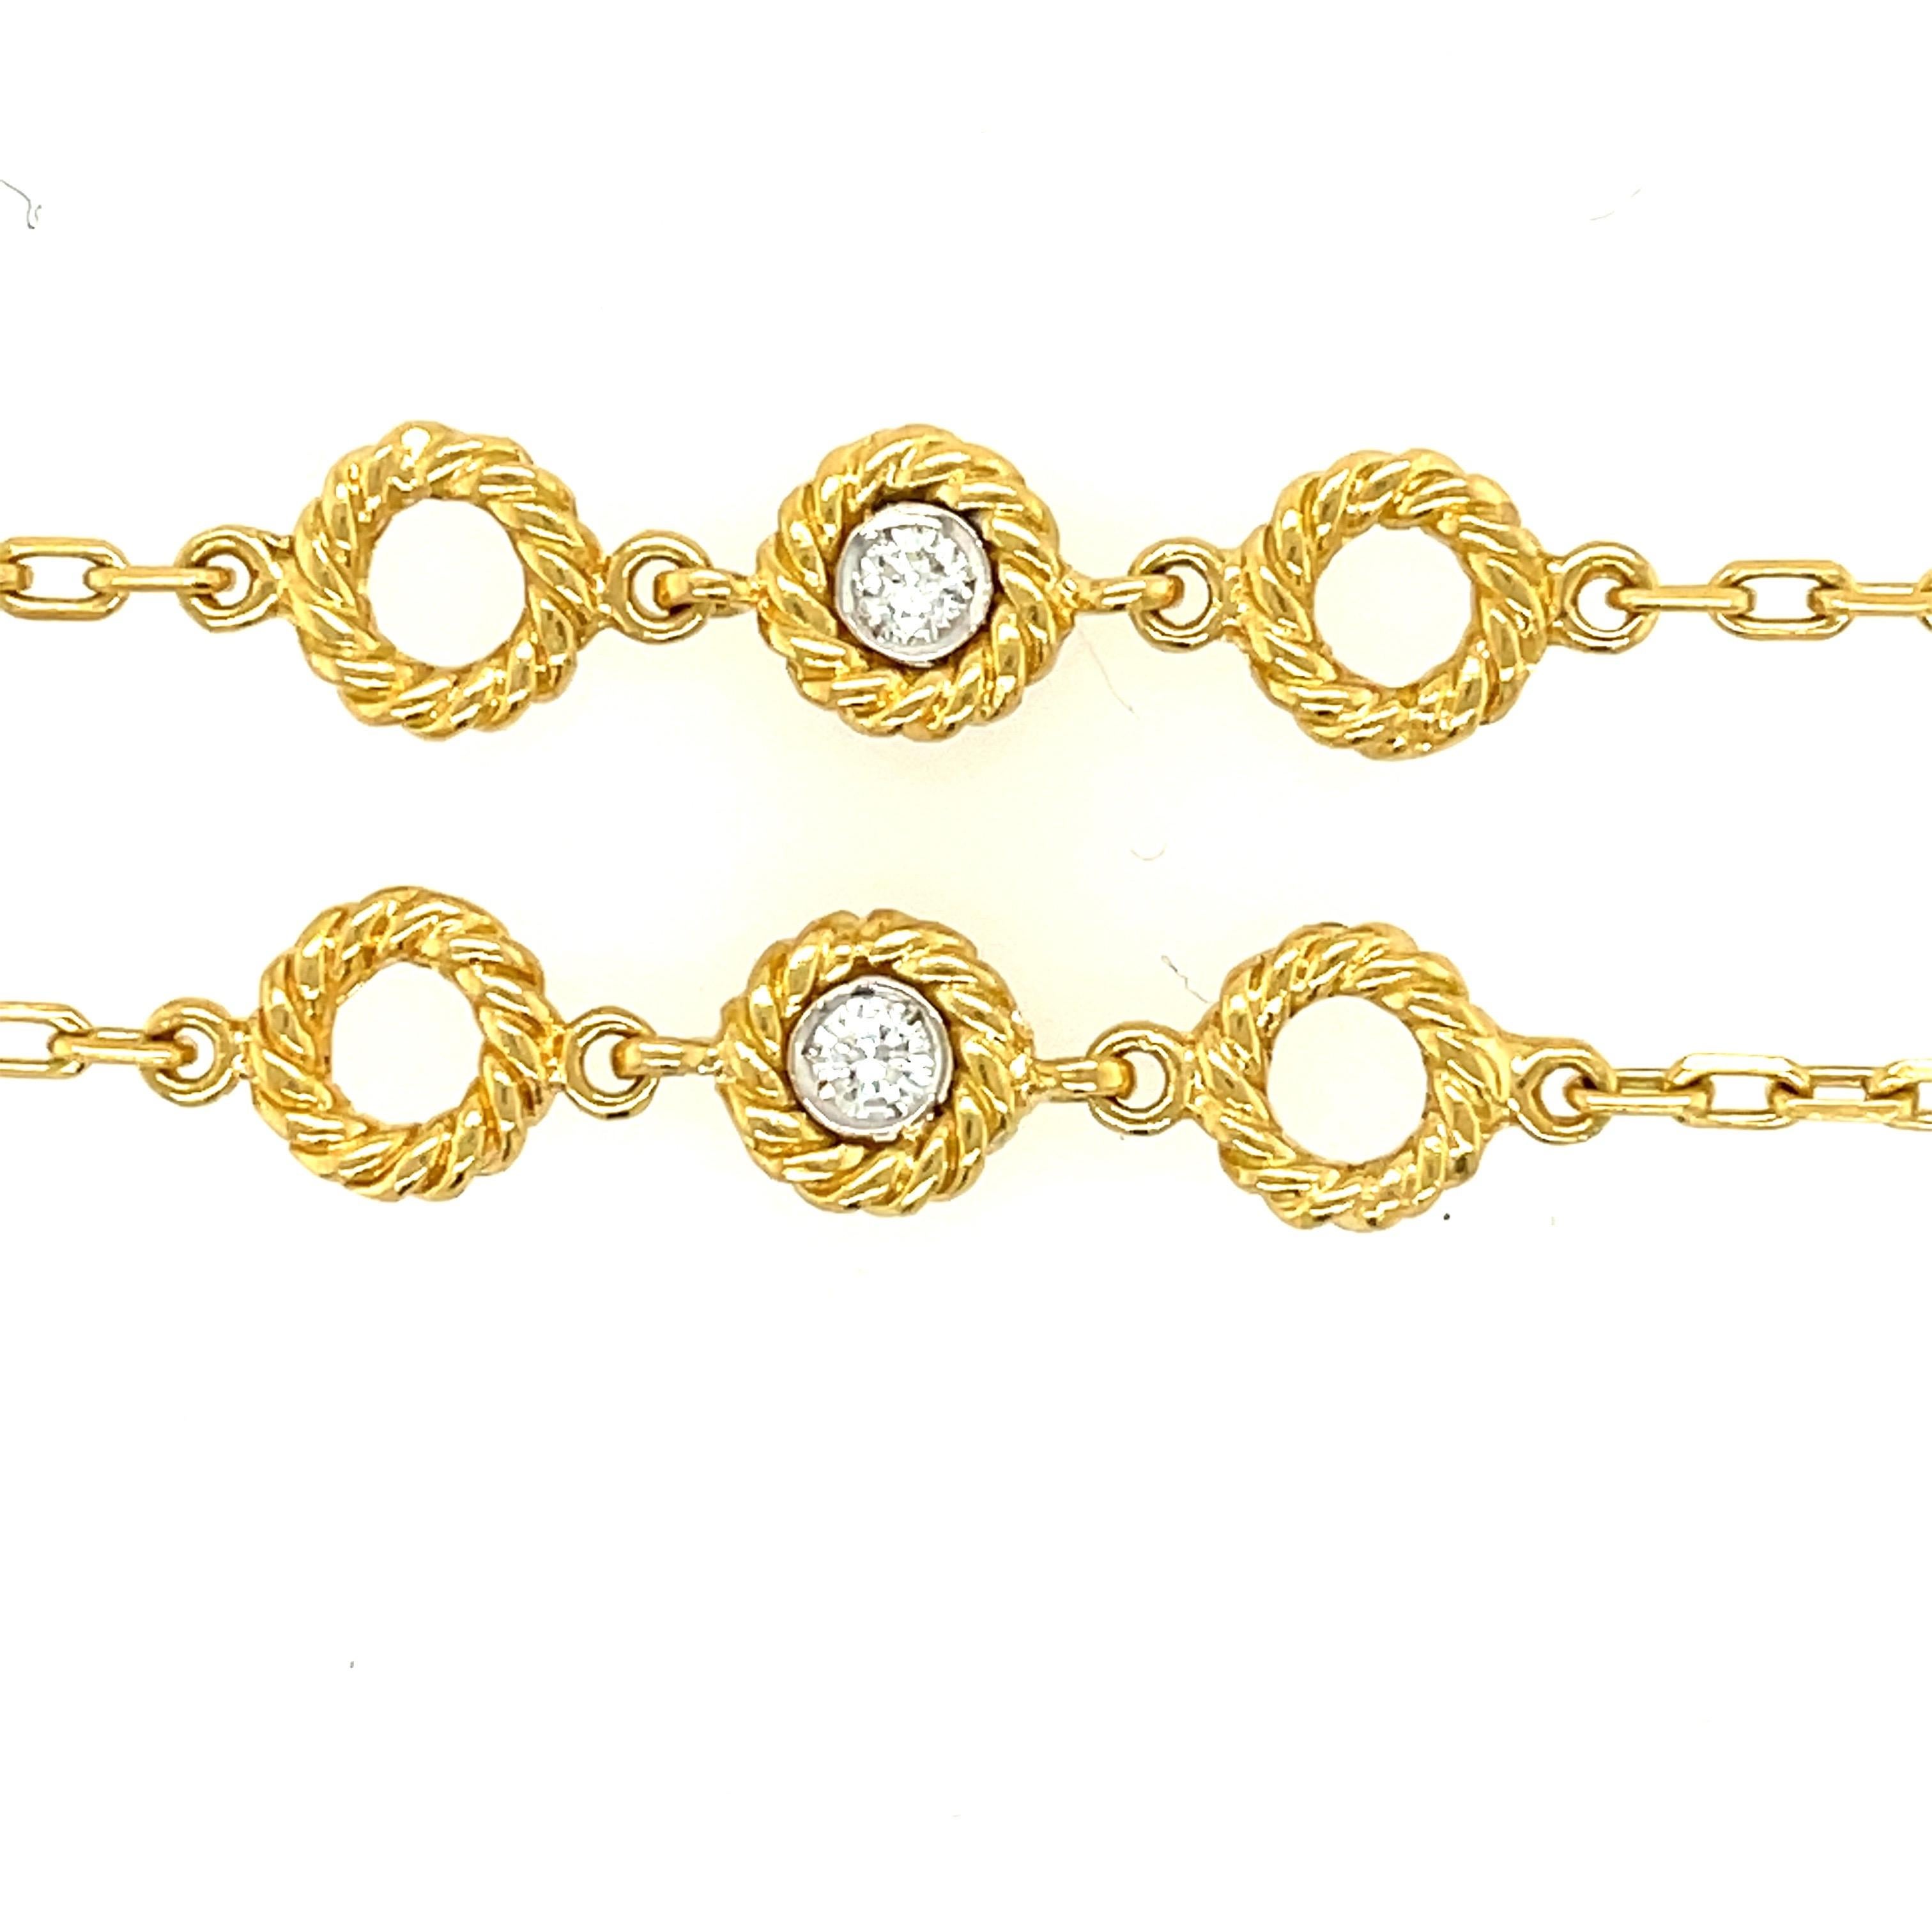 A wearable 18k yellow gold link chain with twisted gold sections and bezel set diamonds, circa 2000. The necklace has a clasp and safety which is nice if you want to layer the necklace. The chain is set with 7 Round Brilliant diamonds, approximately